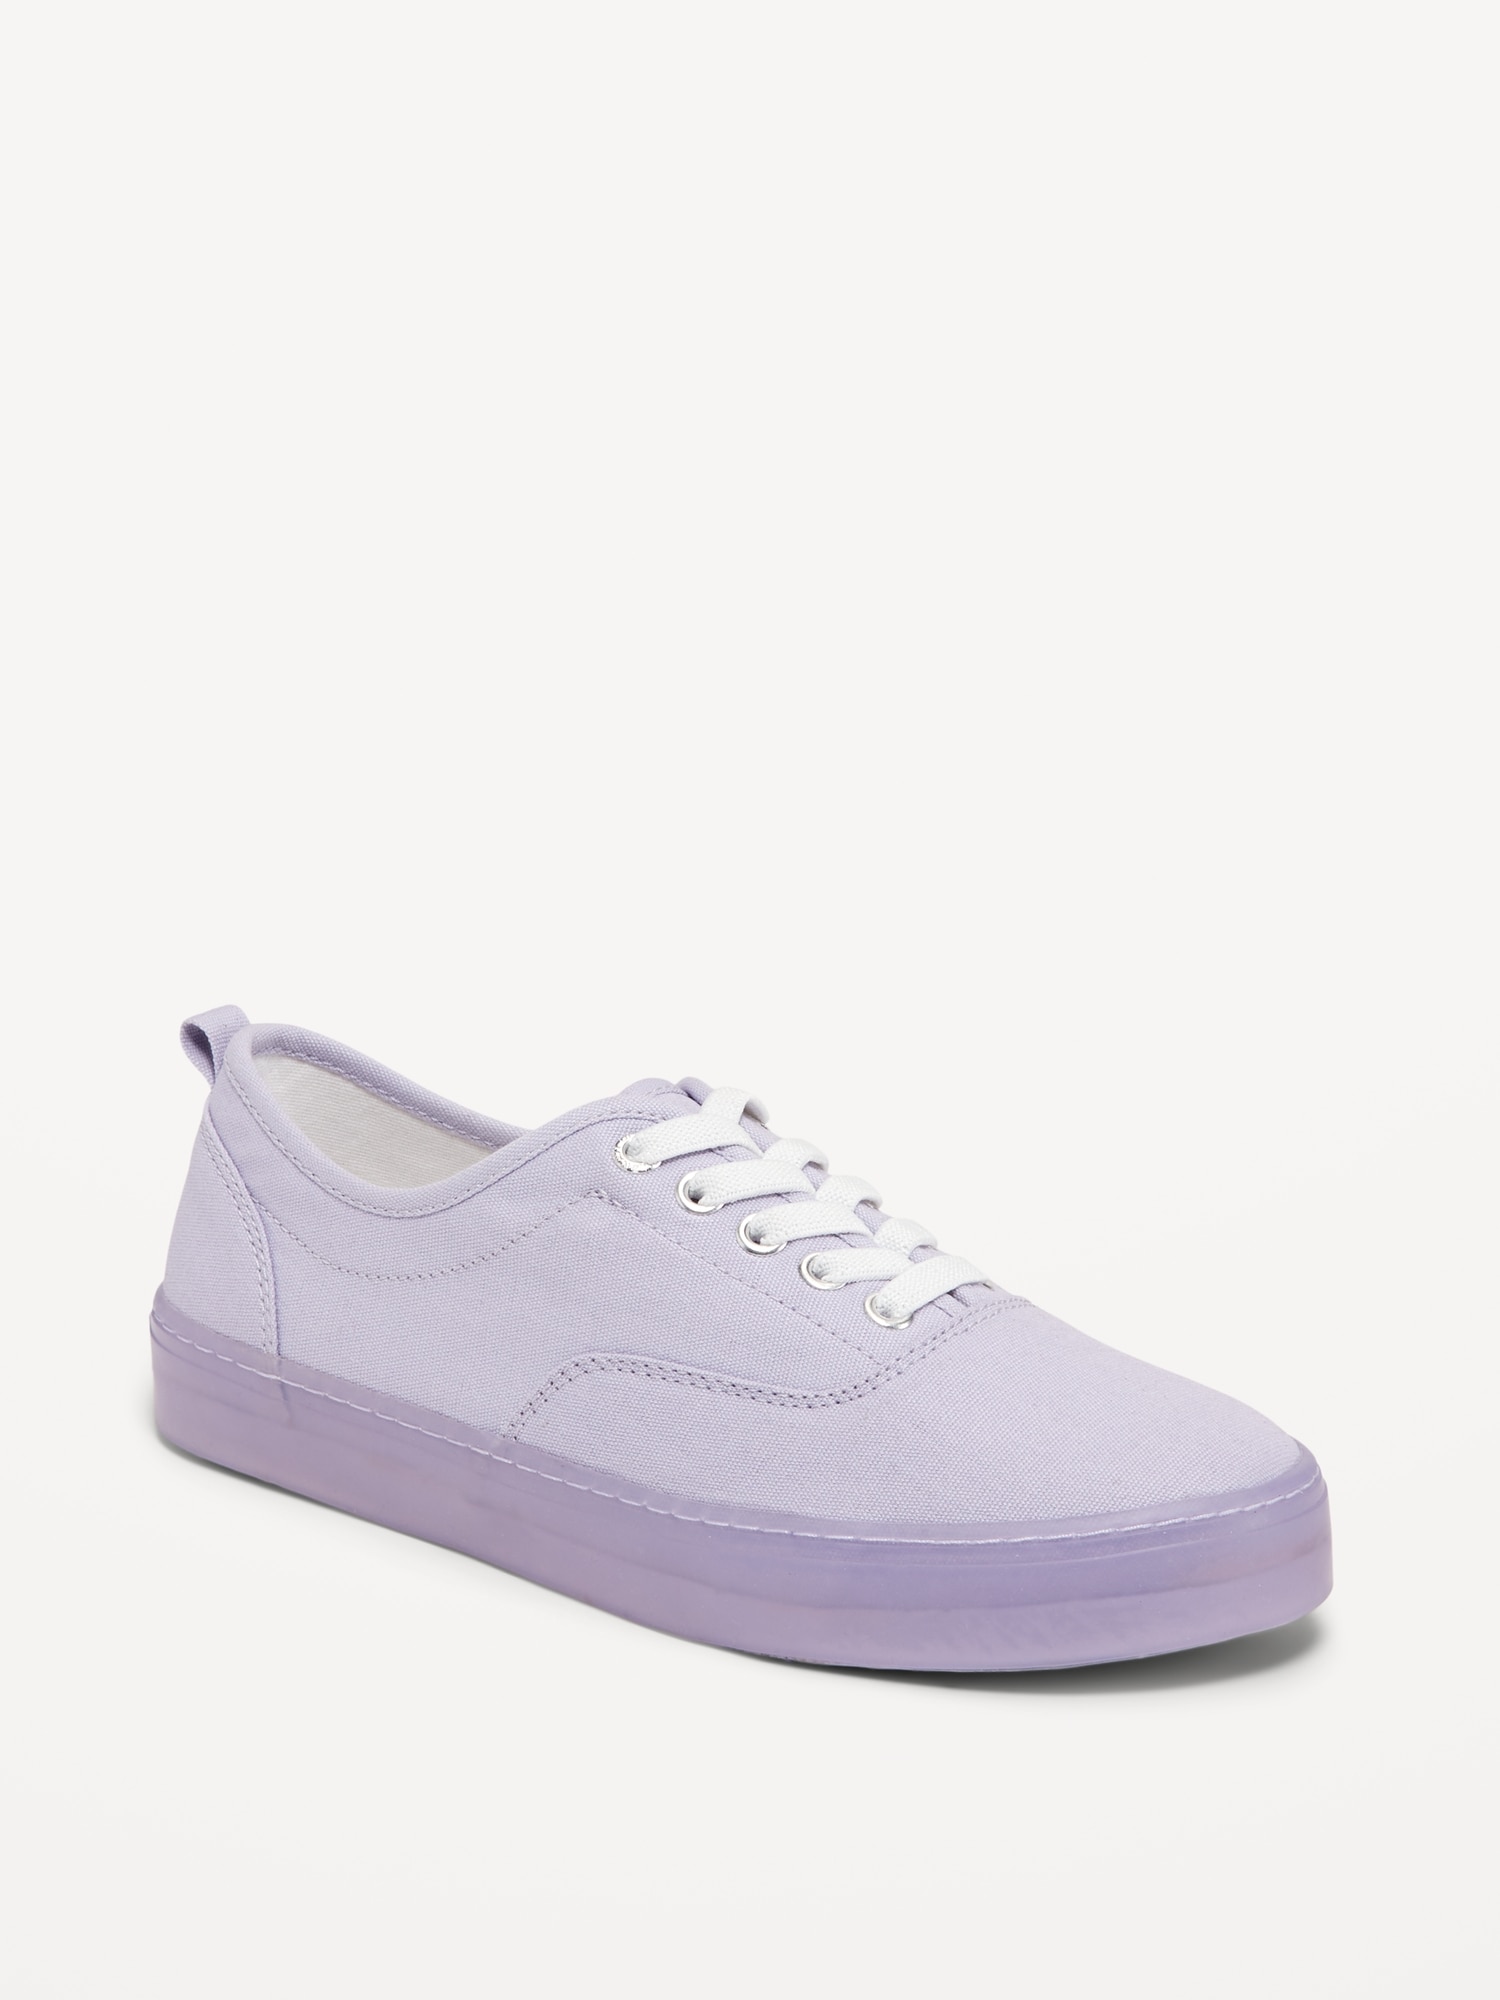 Elastic-Lace Canvas Jelly Sneakers for Girls | Old Navy